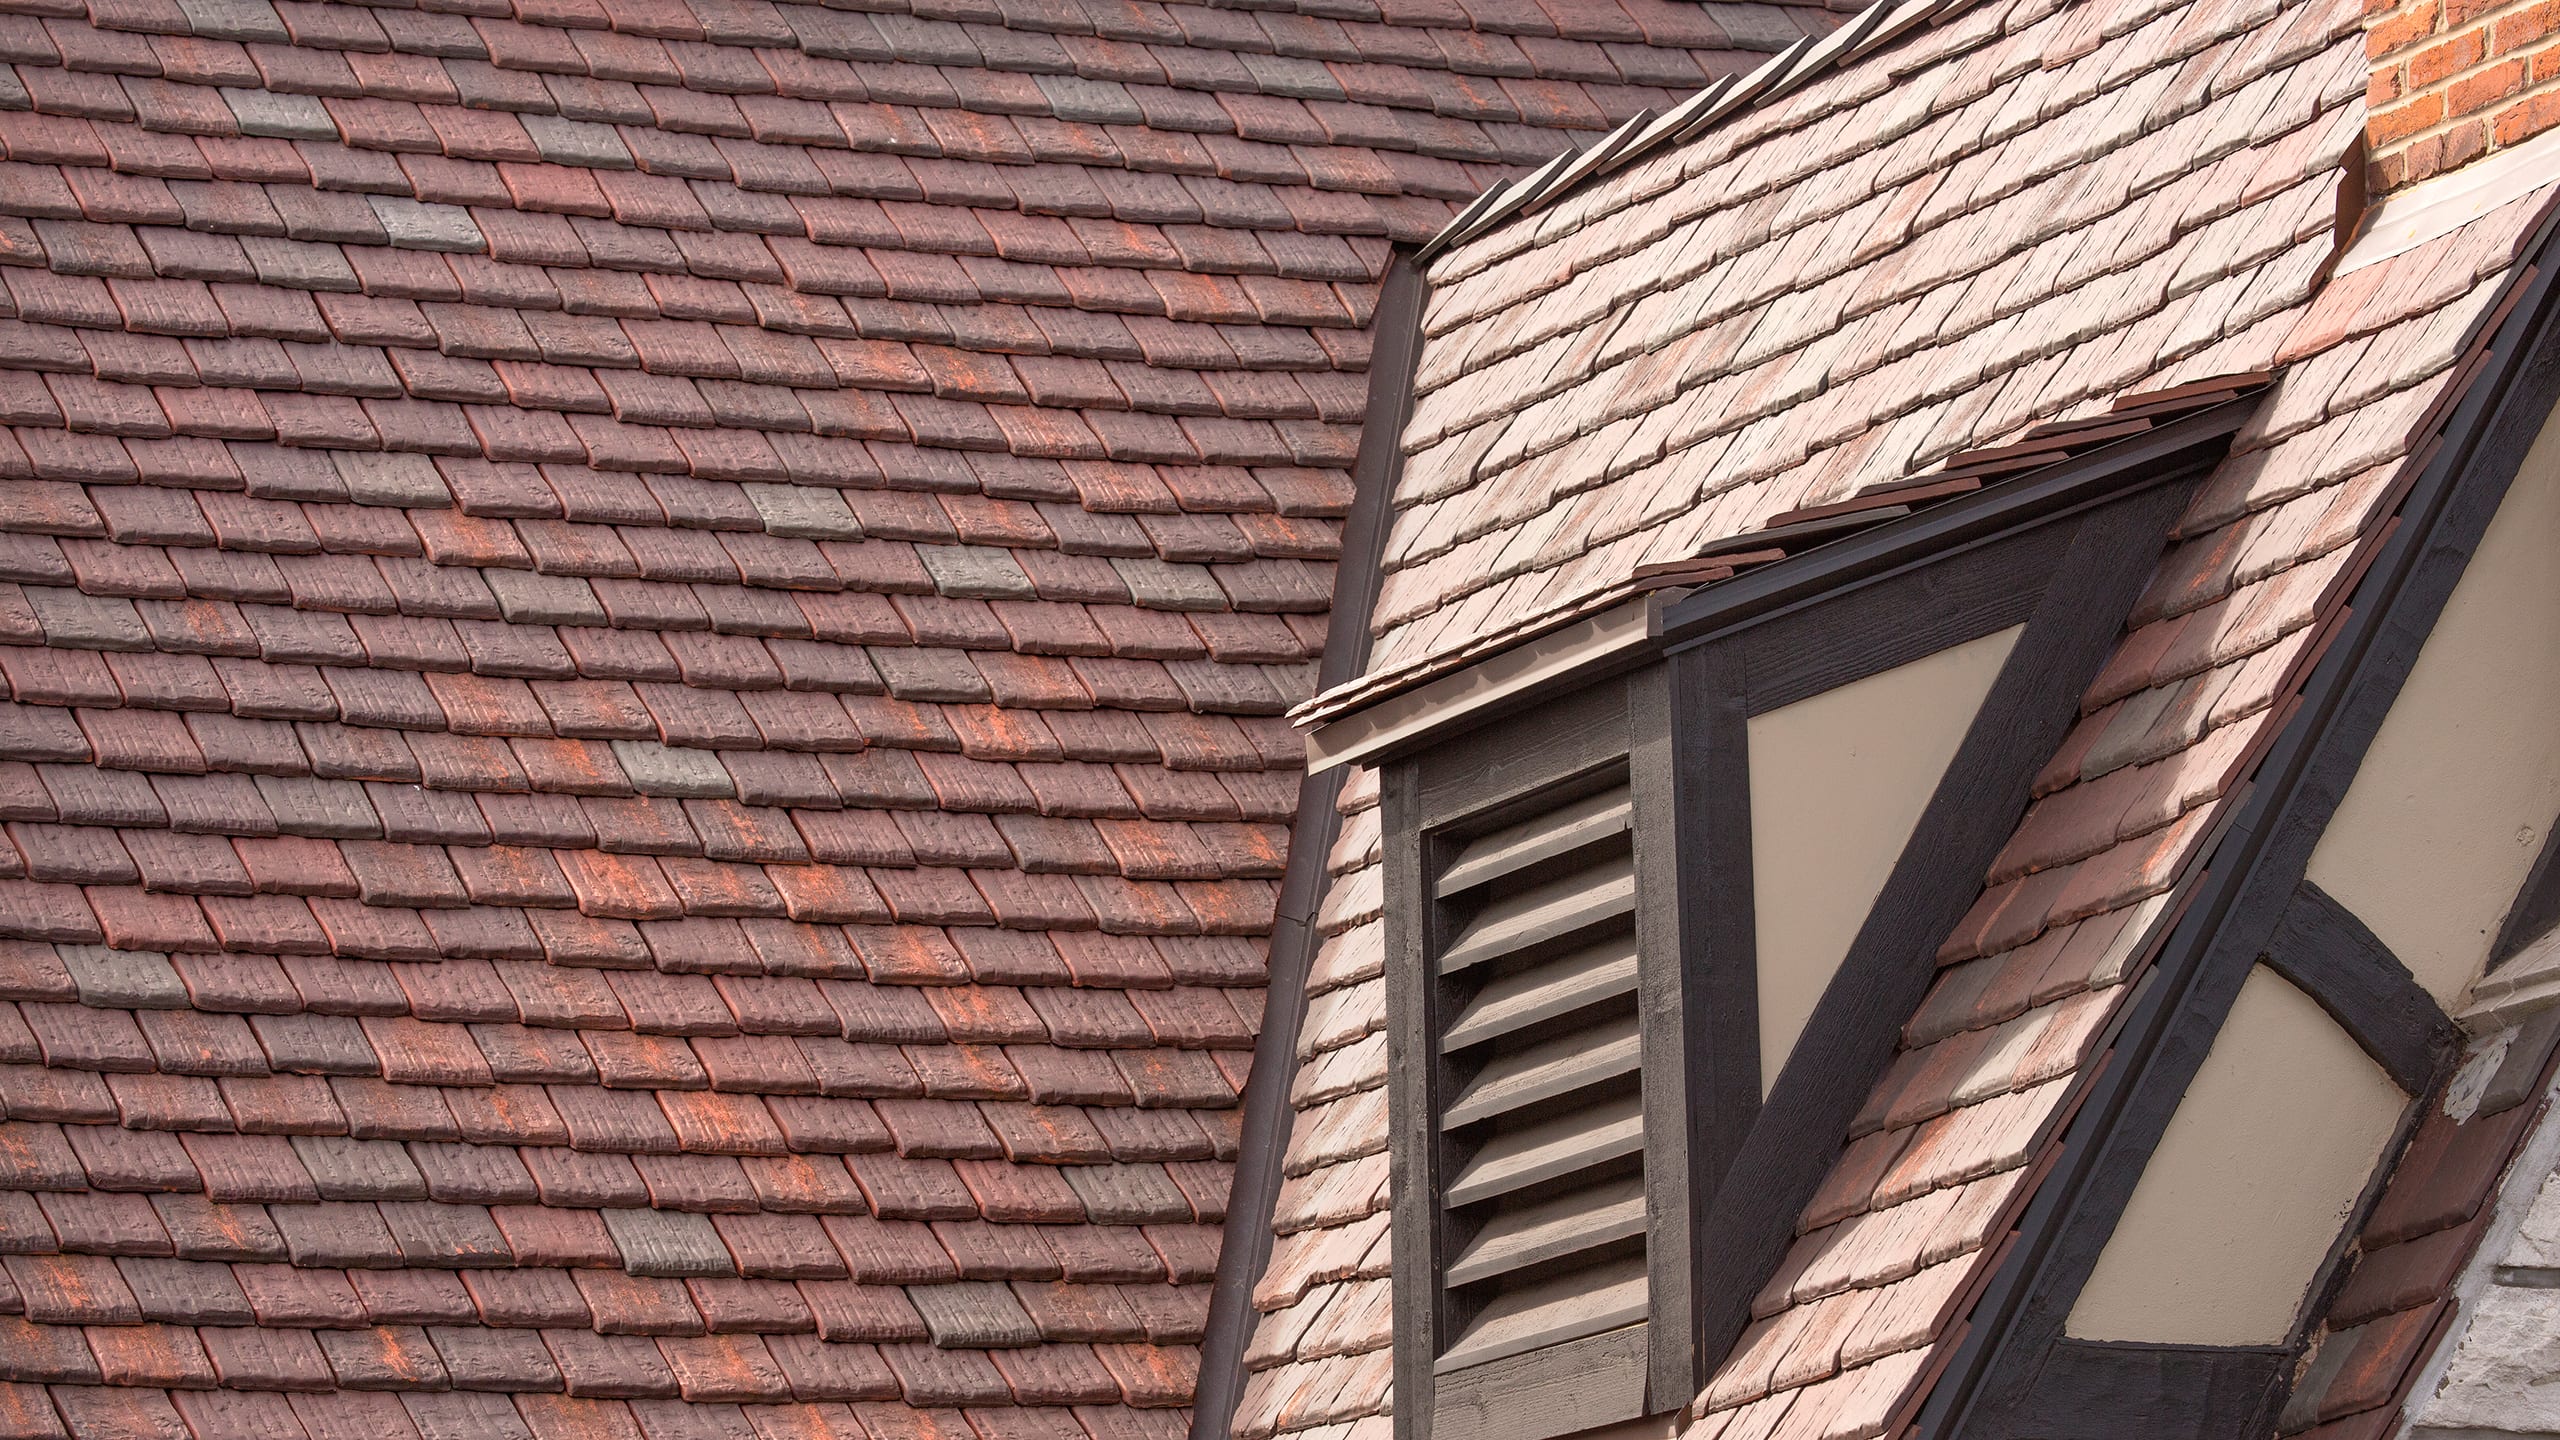 Cheshire Inn Boundary Restaurant Featuring Ludowici Colonial Clay Roof Tile